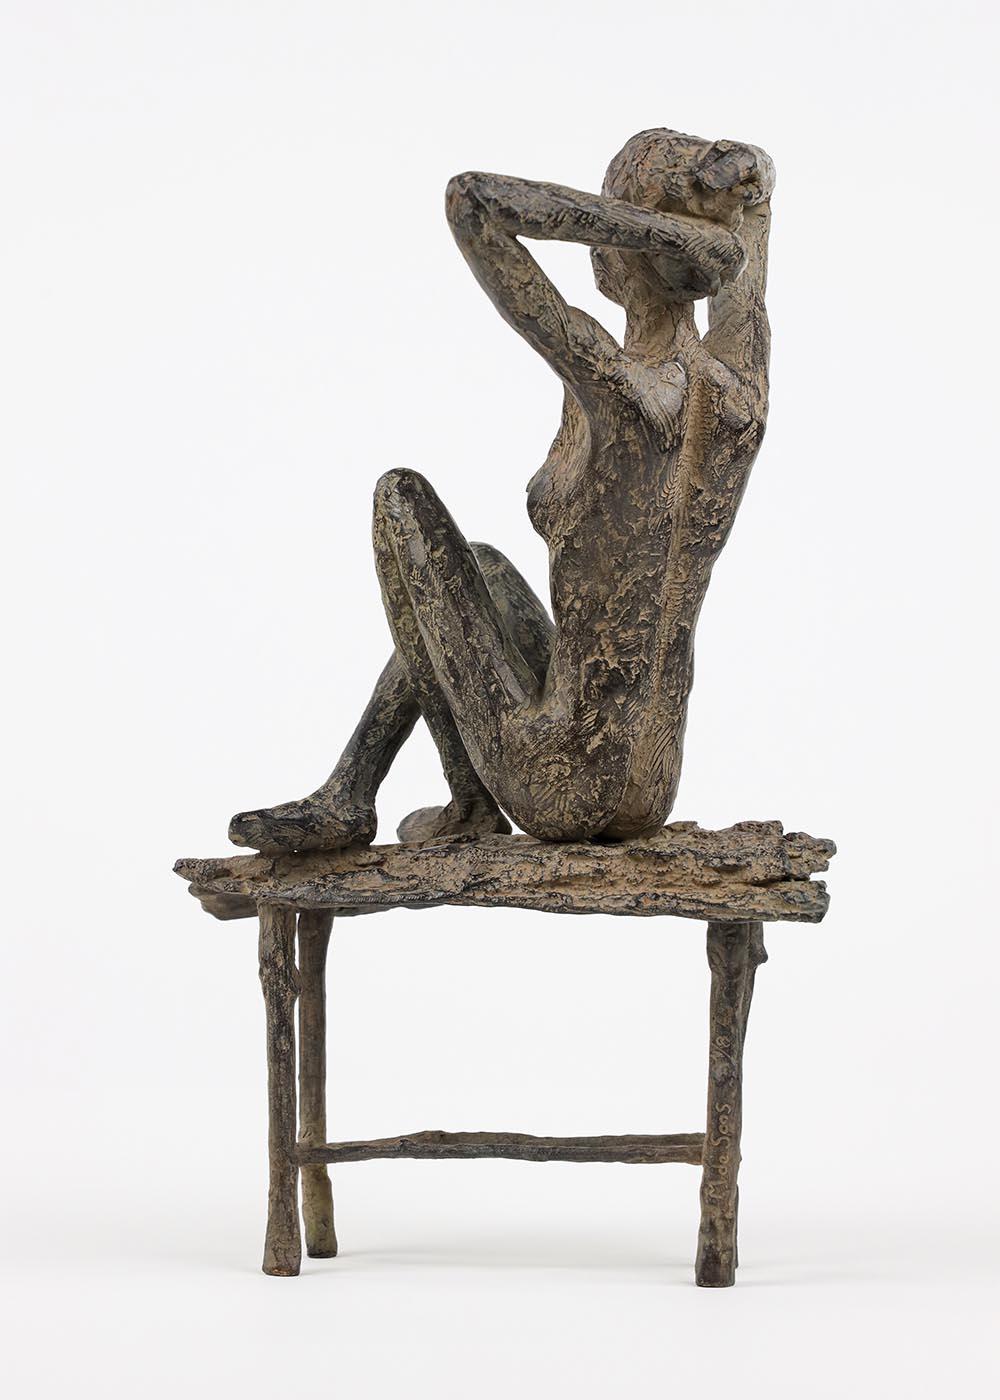 Enchanting Rituals by Marine de Soos - Seated Female Nude, bronze sculpture For Sale 3